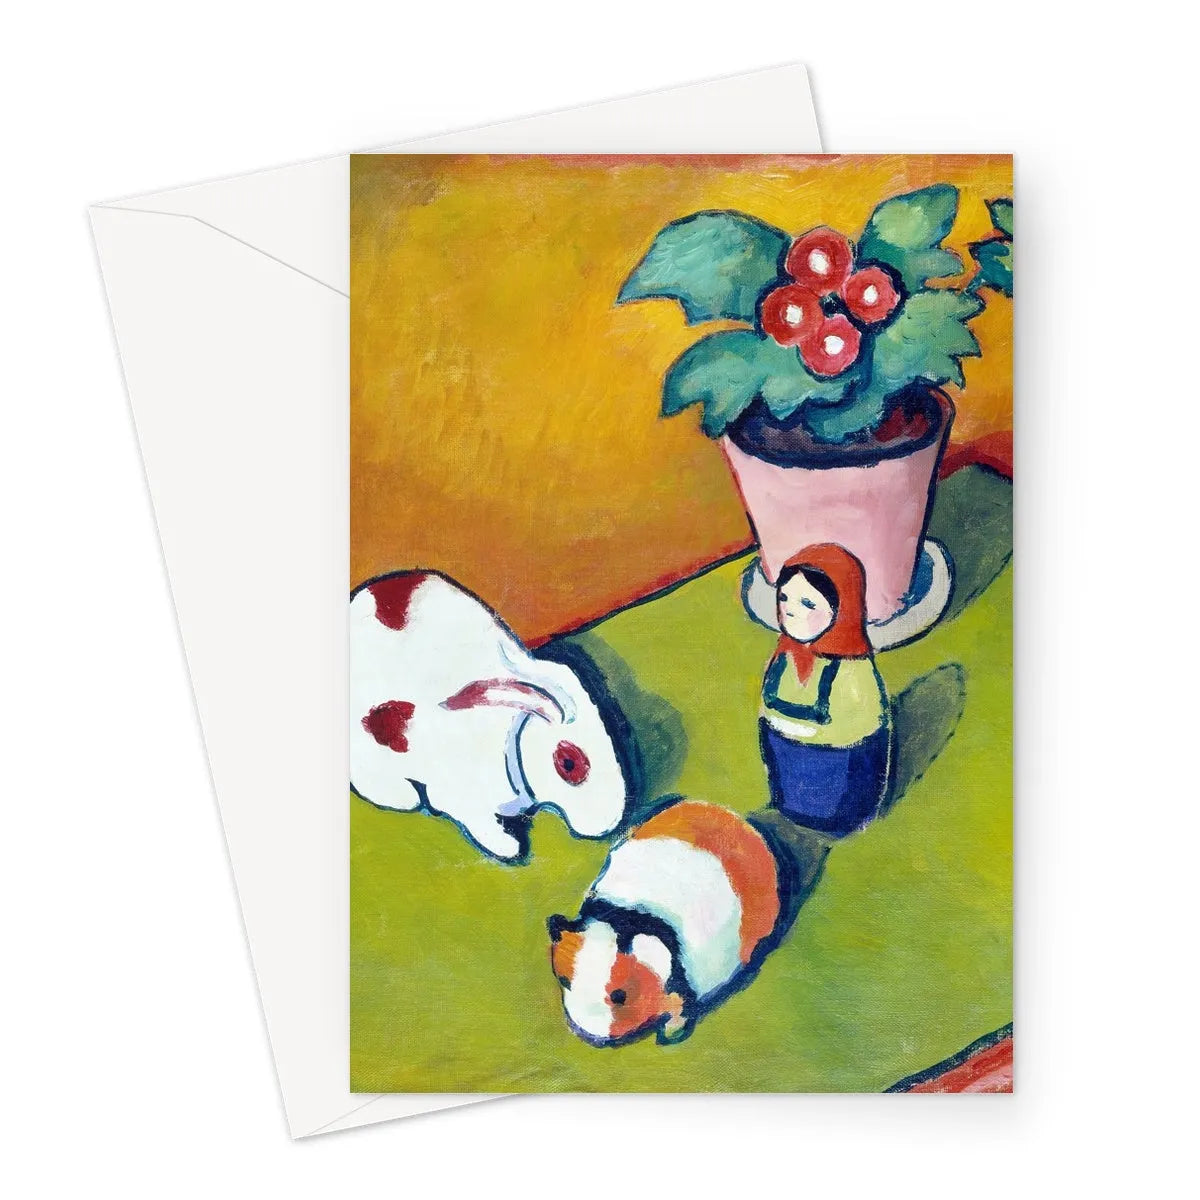 Little Walter’s Toys By August Macke Greeting Card - A5 Portrait / 1 Card - Greeting & Note Cards - Aesthetic Art